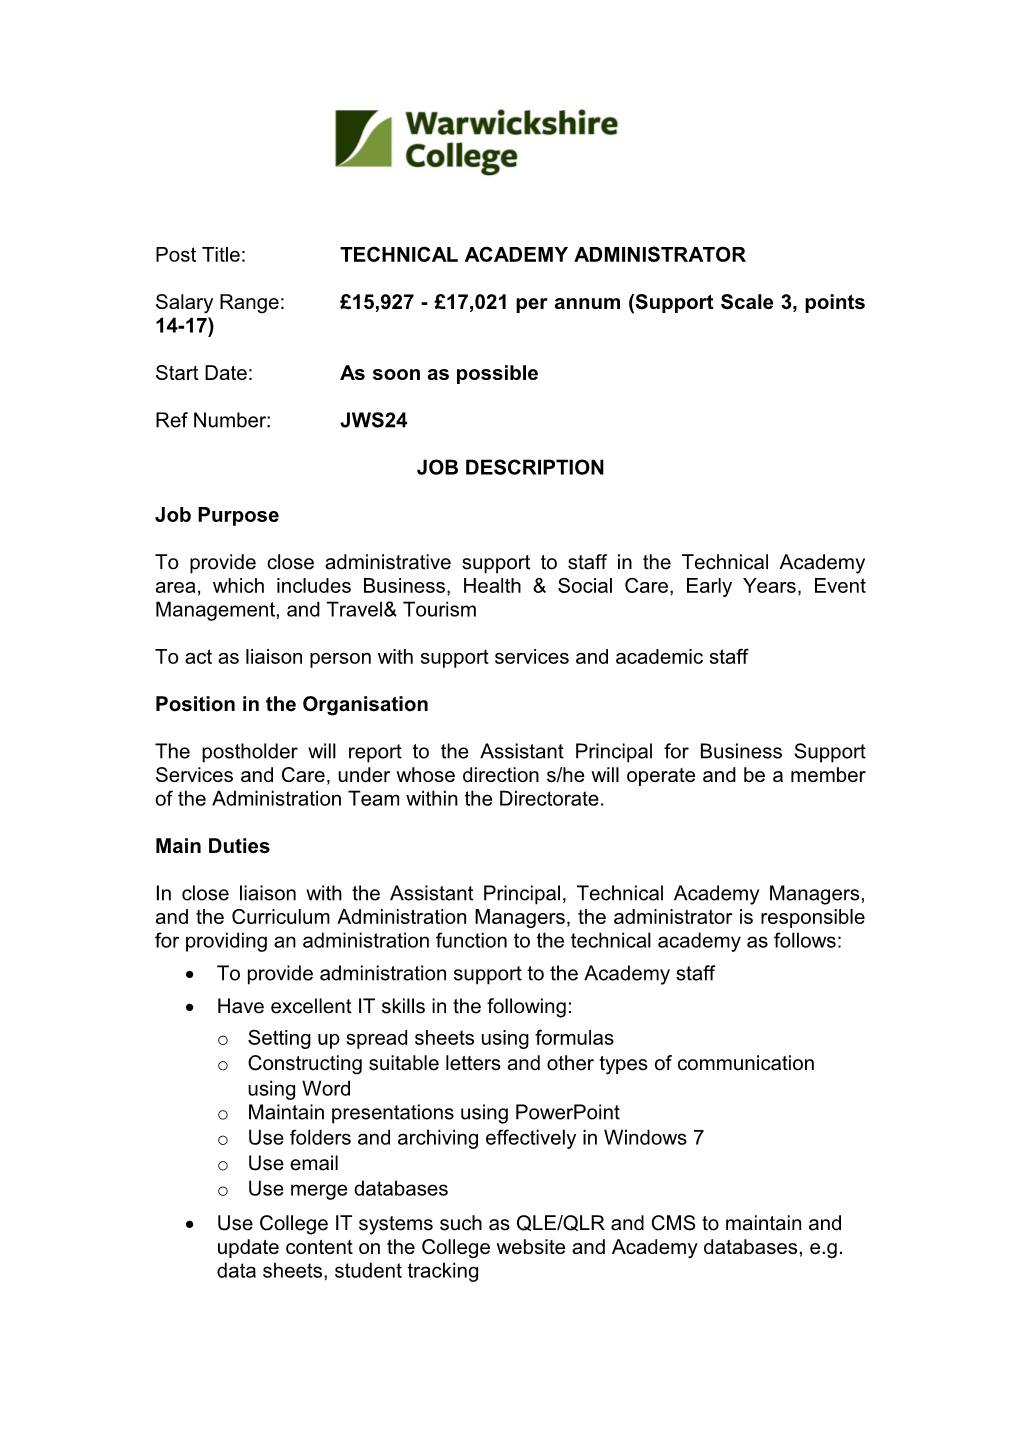 Post Title: TECHNICAL ACADEMY ADMINISTRATOR